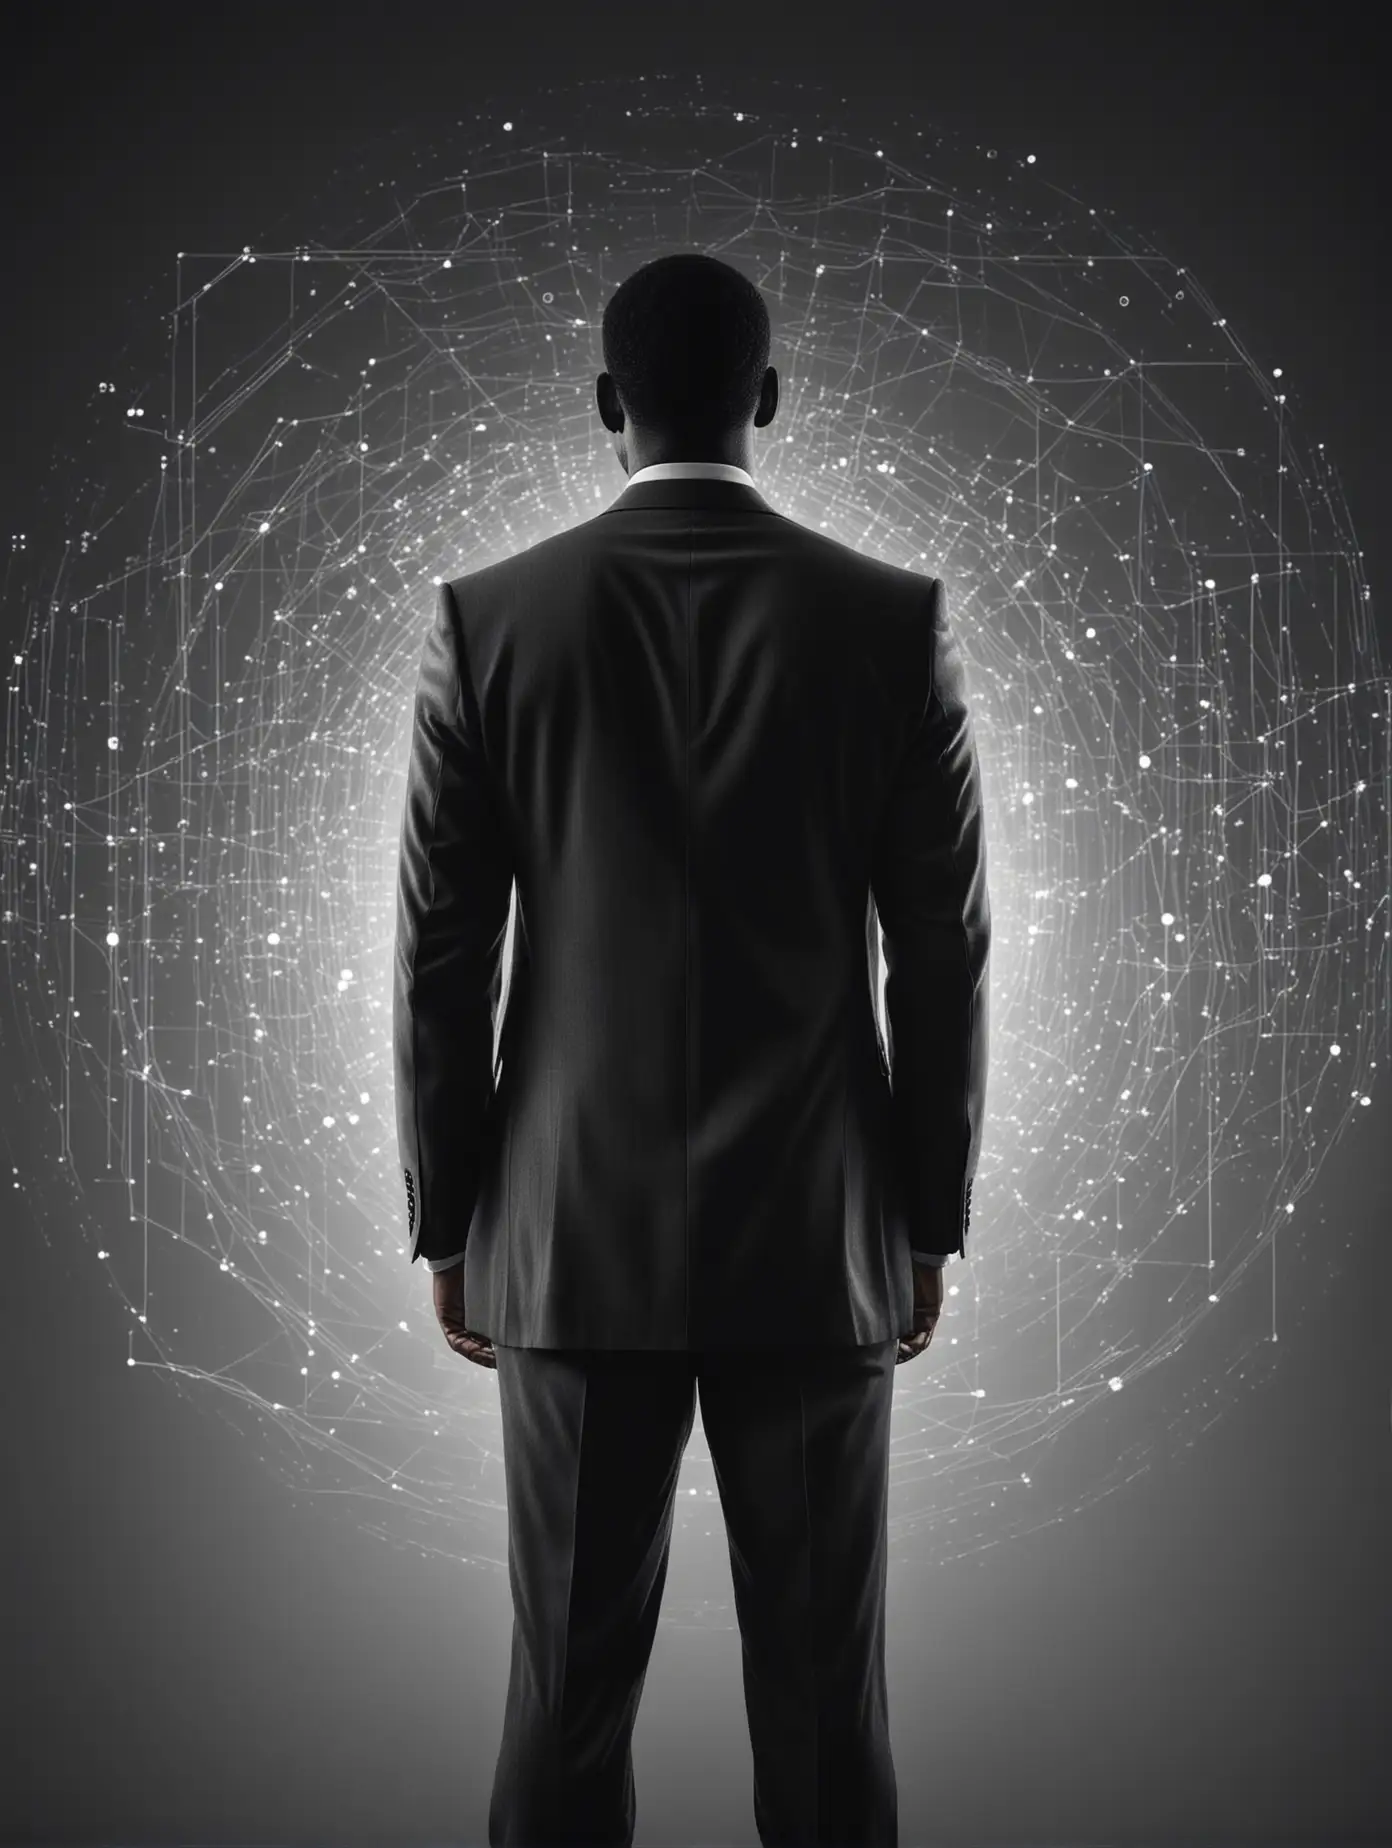 A minimal solid silhouette of a black man, facing the back on the image, 40 years old, professional,wearing a suit, surrounded by a background of AI electronic elements, abstract, greyscale